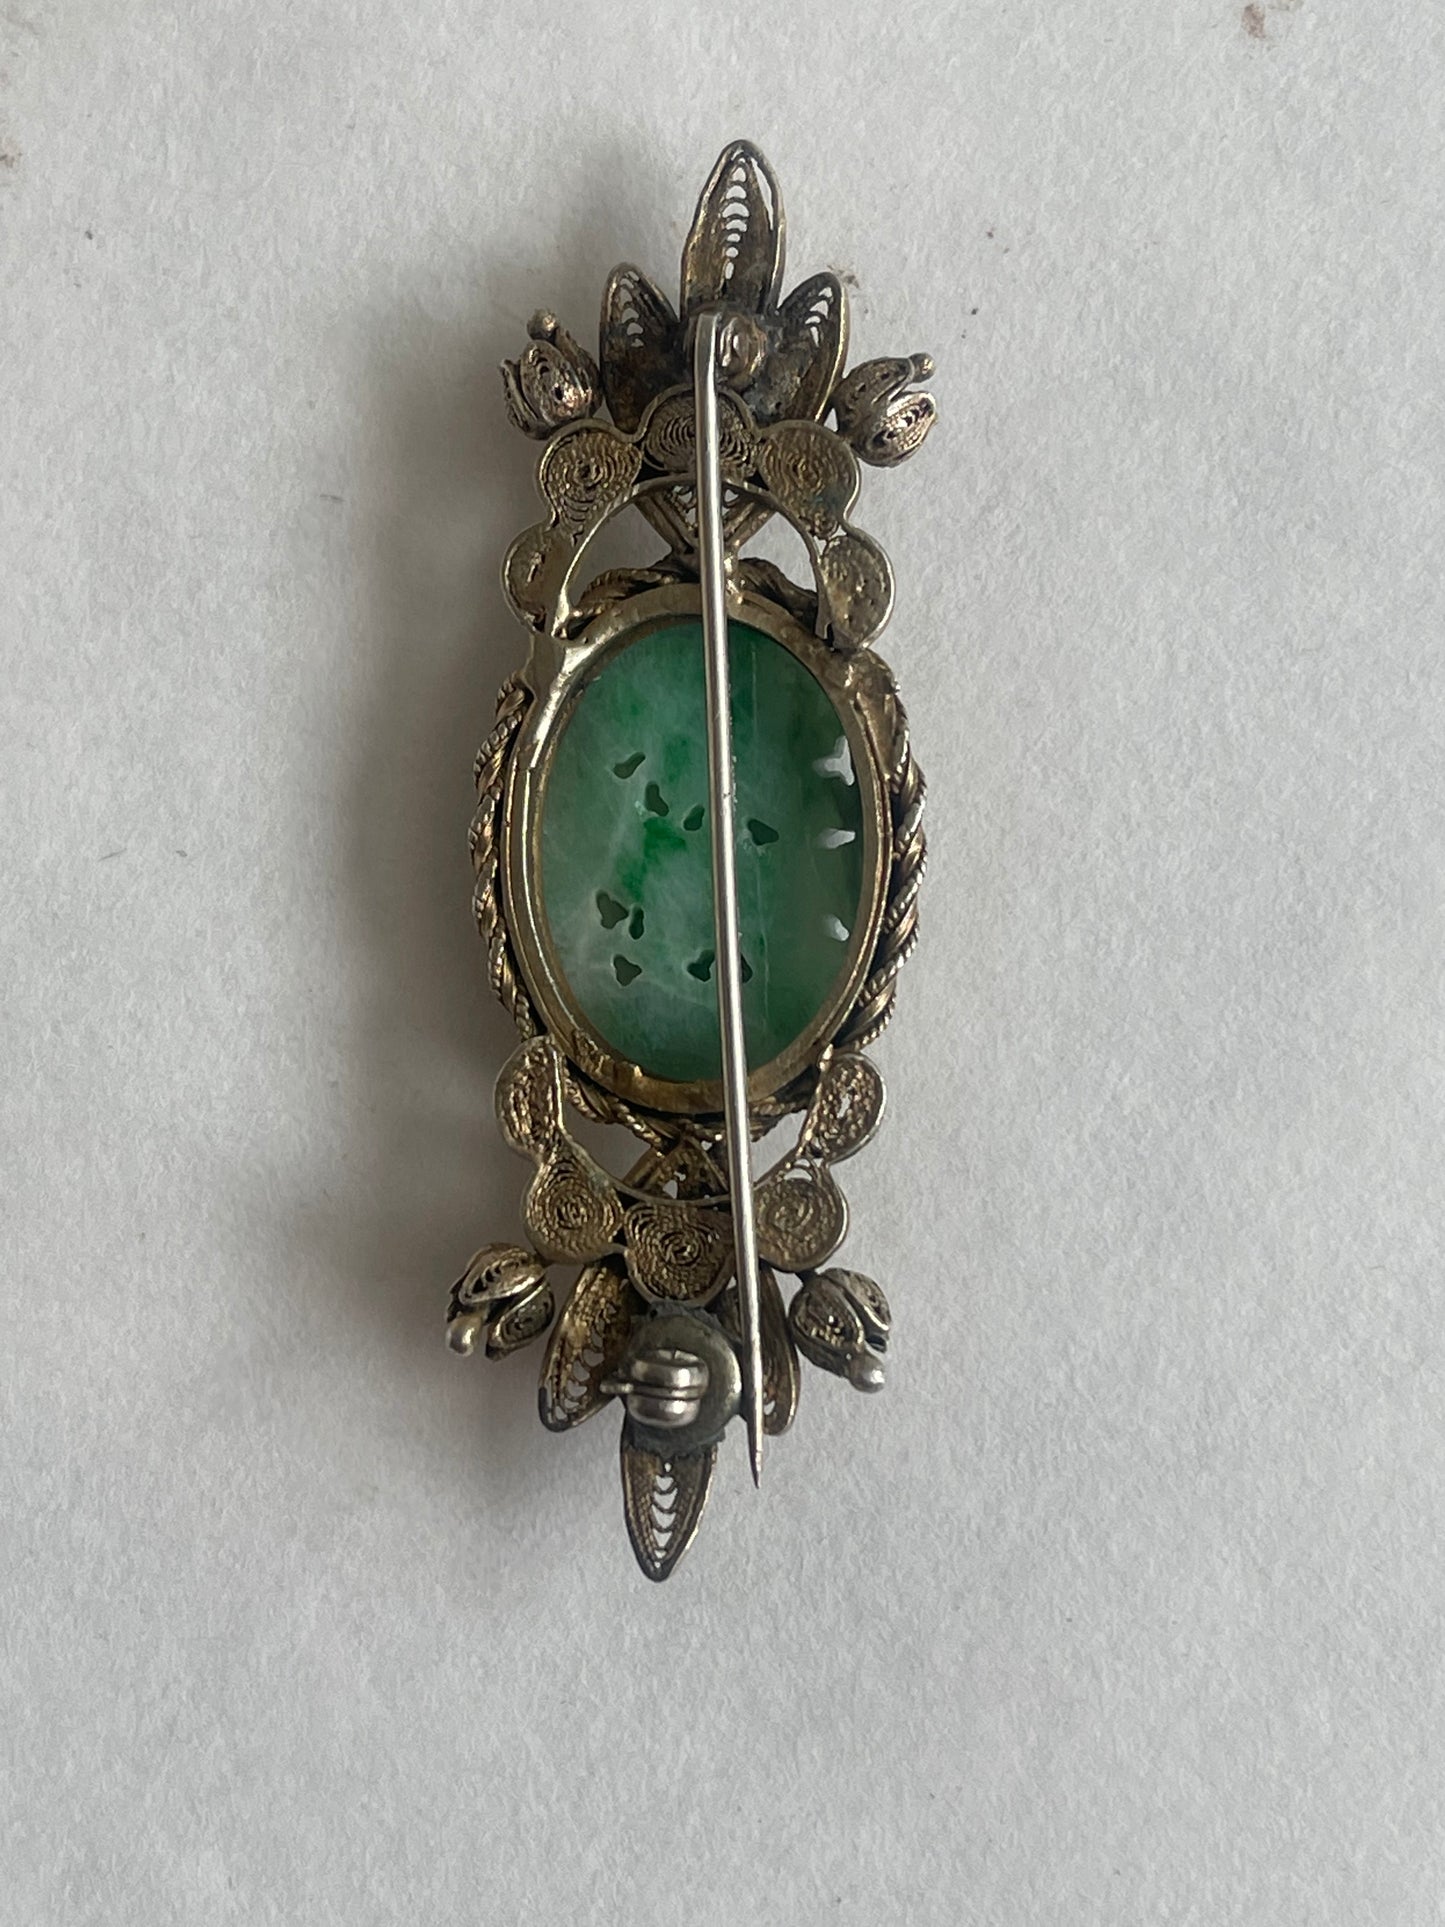 A vintage jade brooch In a gilded silver setting